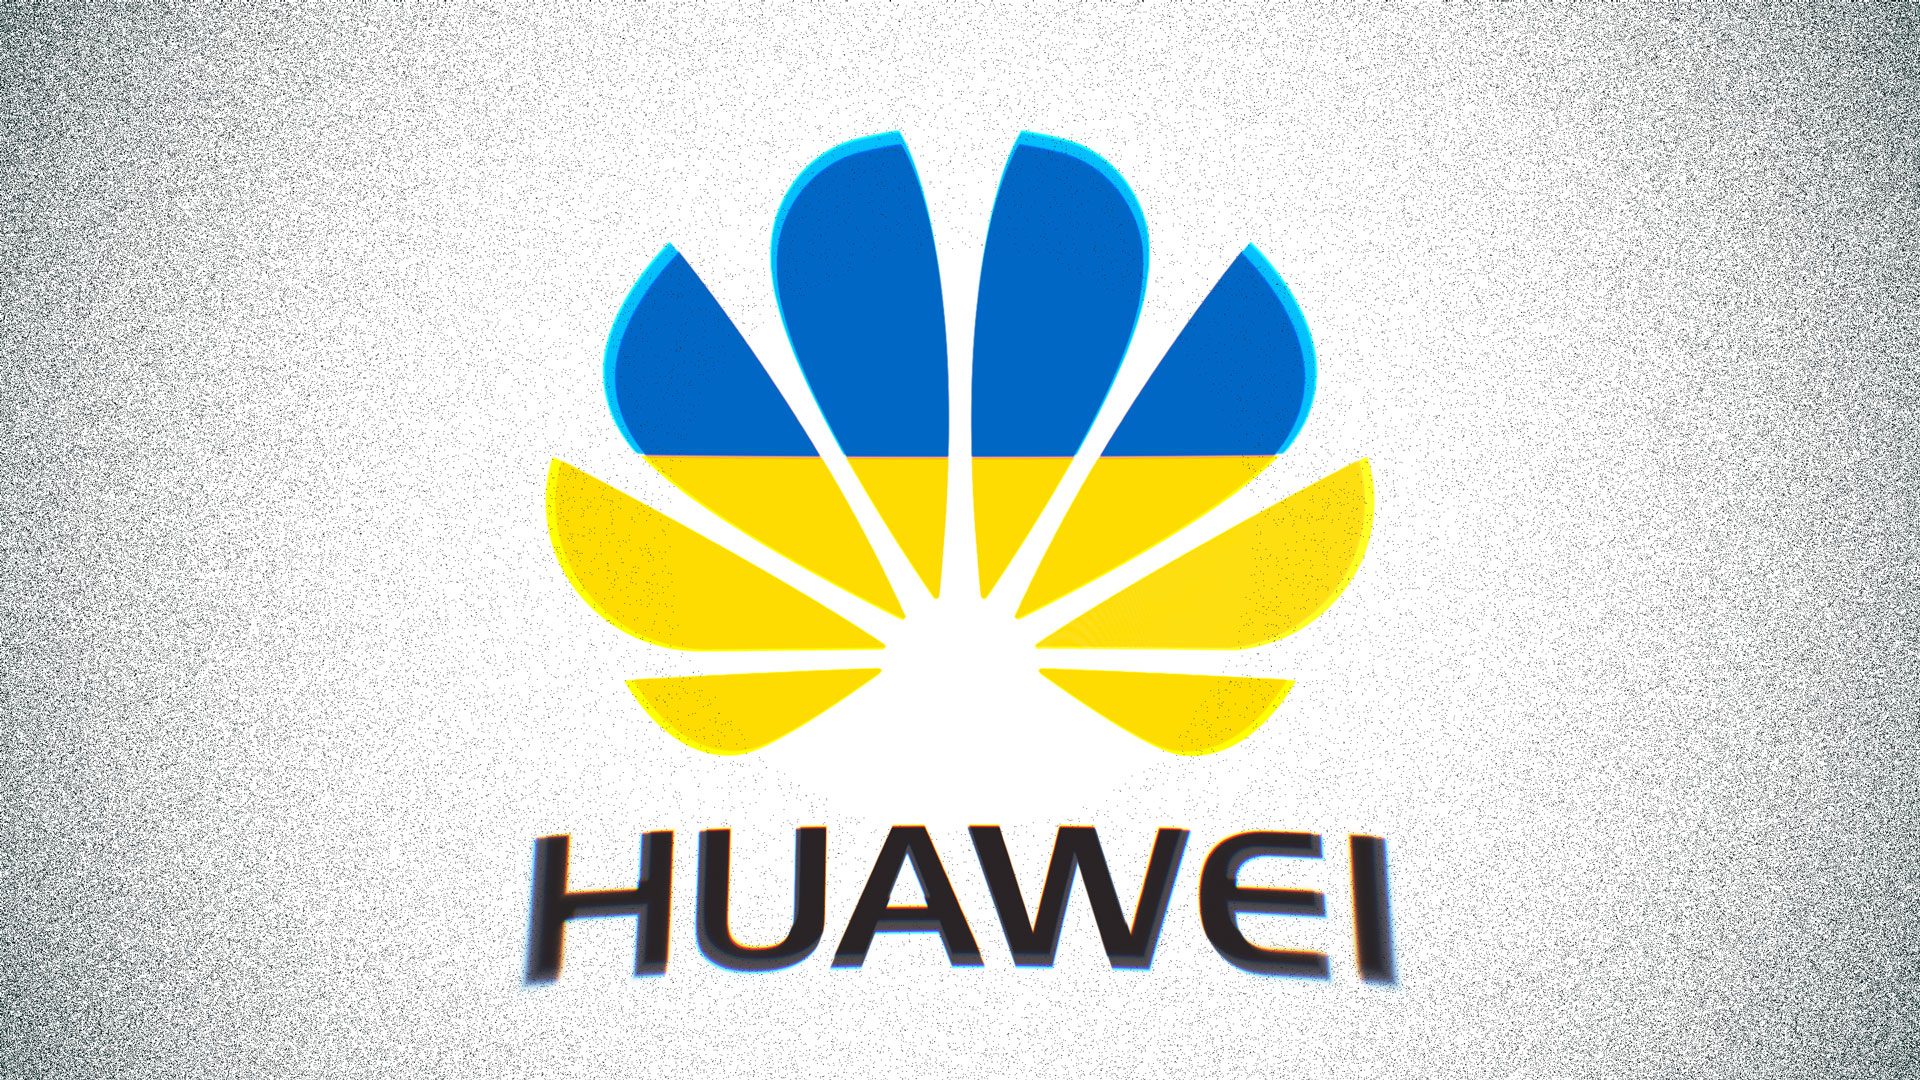 Ukraine’s controversial cybersecurity deal with Huawei